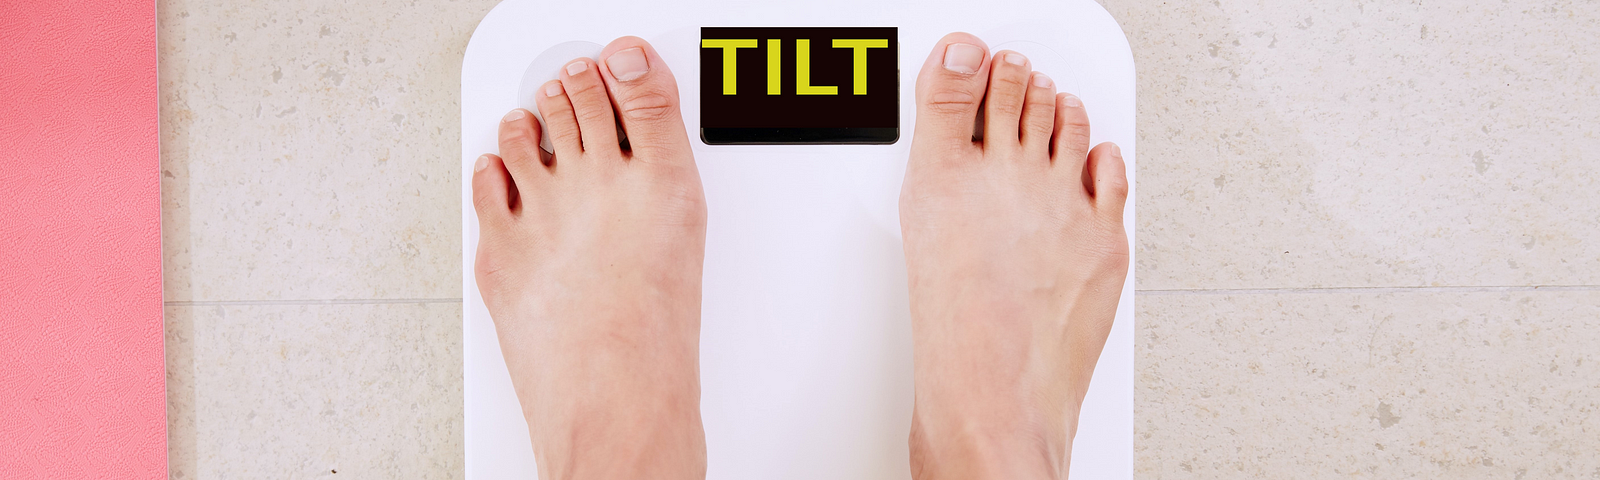 Man standing on scale with a “TILT” Message